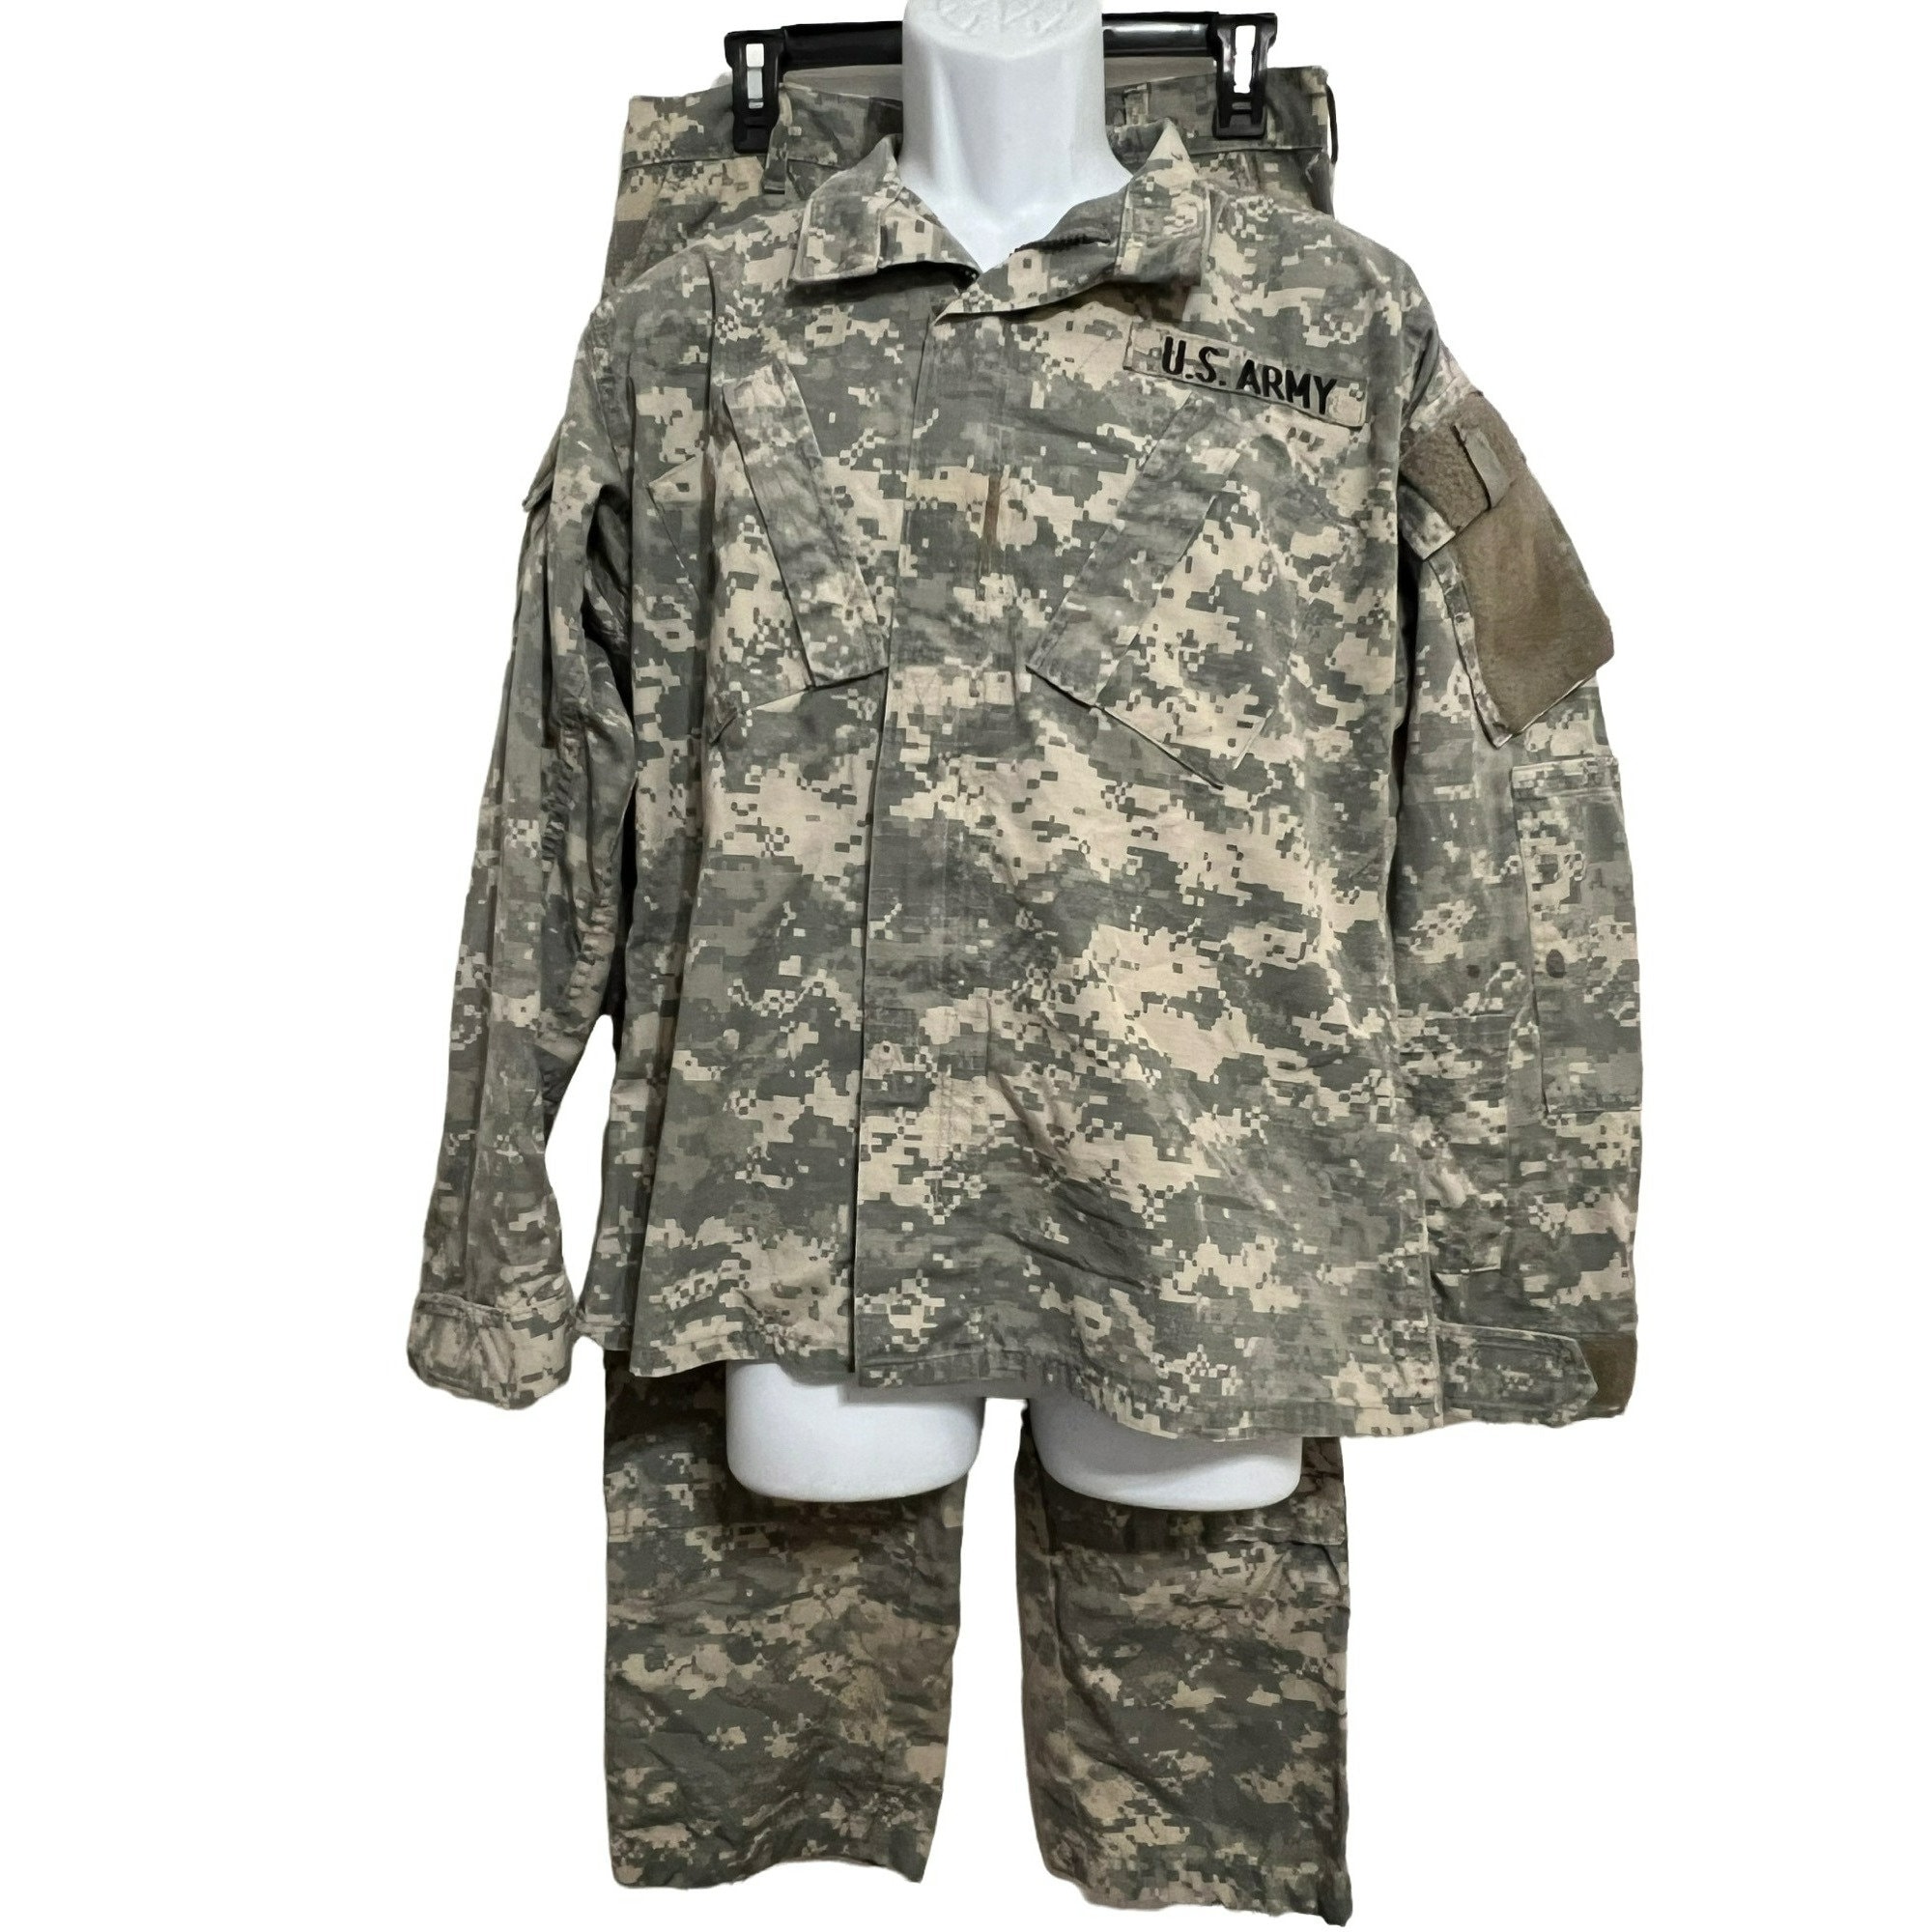 Veste Militaire Americaine Load Bearing Usager Coyote ACU